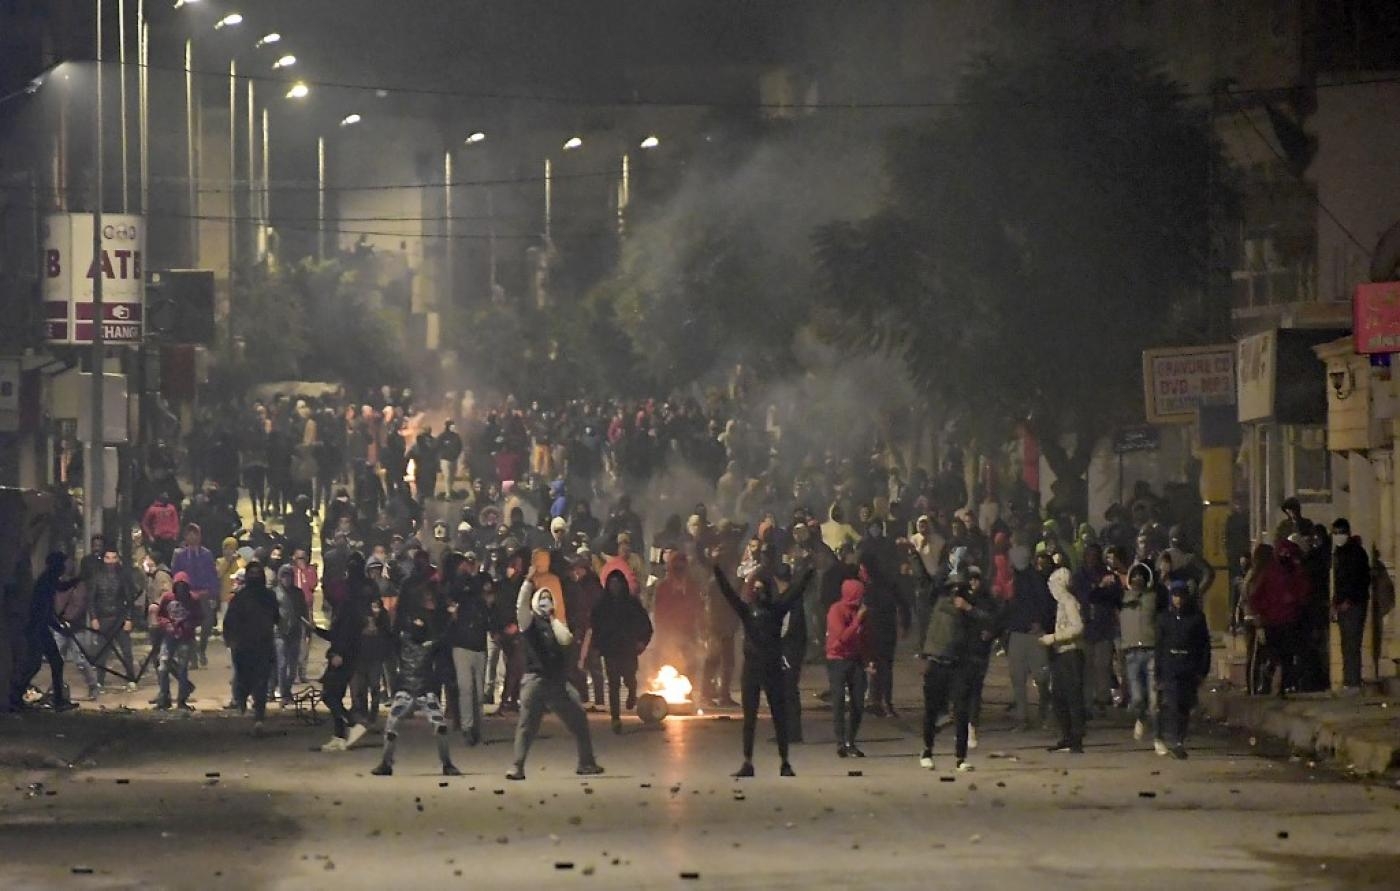 Tunisia: This wave of violence is a political uprising | Middle East Eye